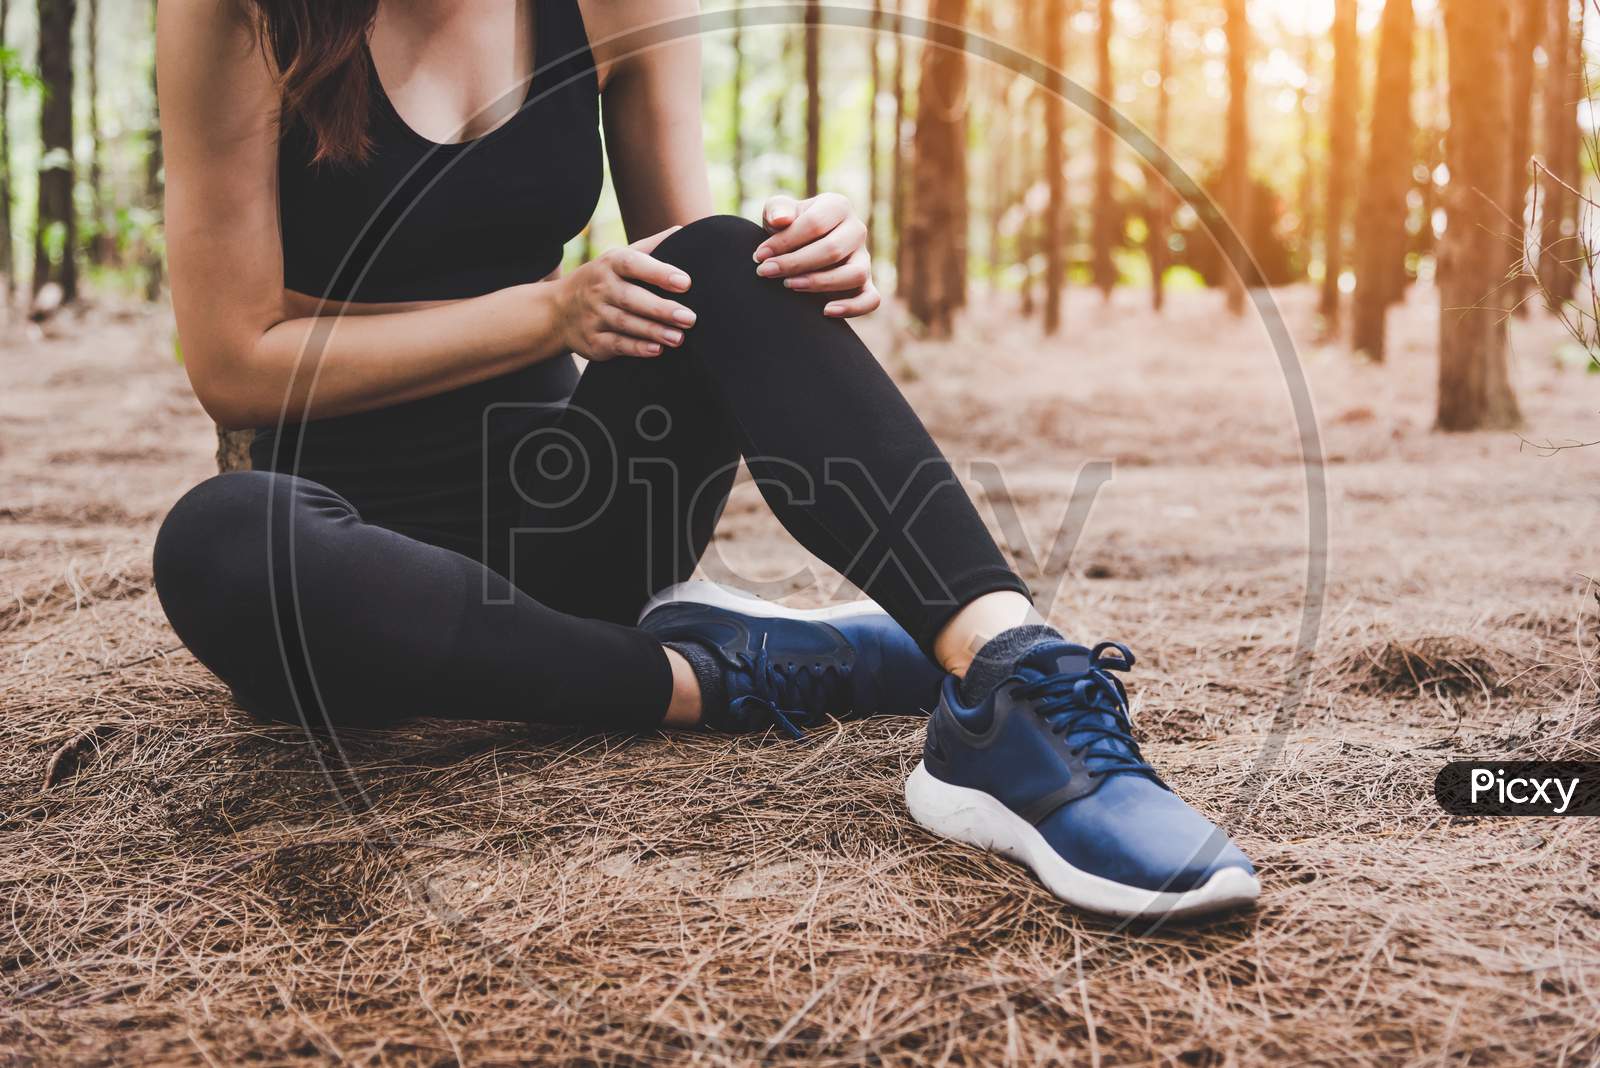 Girl Has Sport Accident Injury In Forest At Outdoors. Healthy And Medicine Concept. Adventure And Travel Concept. Pine Woods Theme.